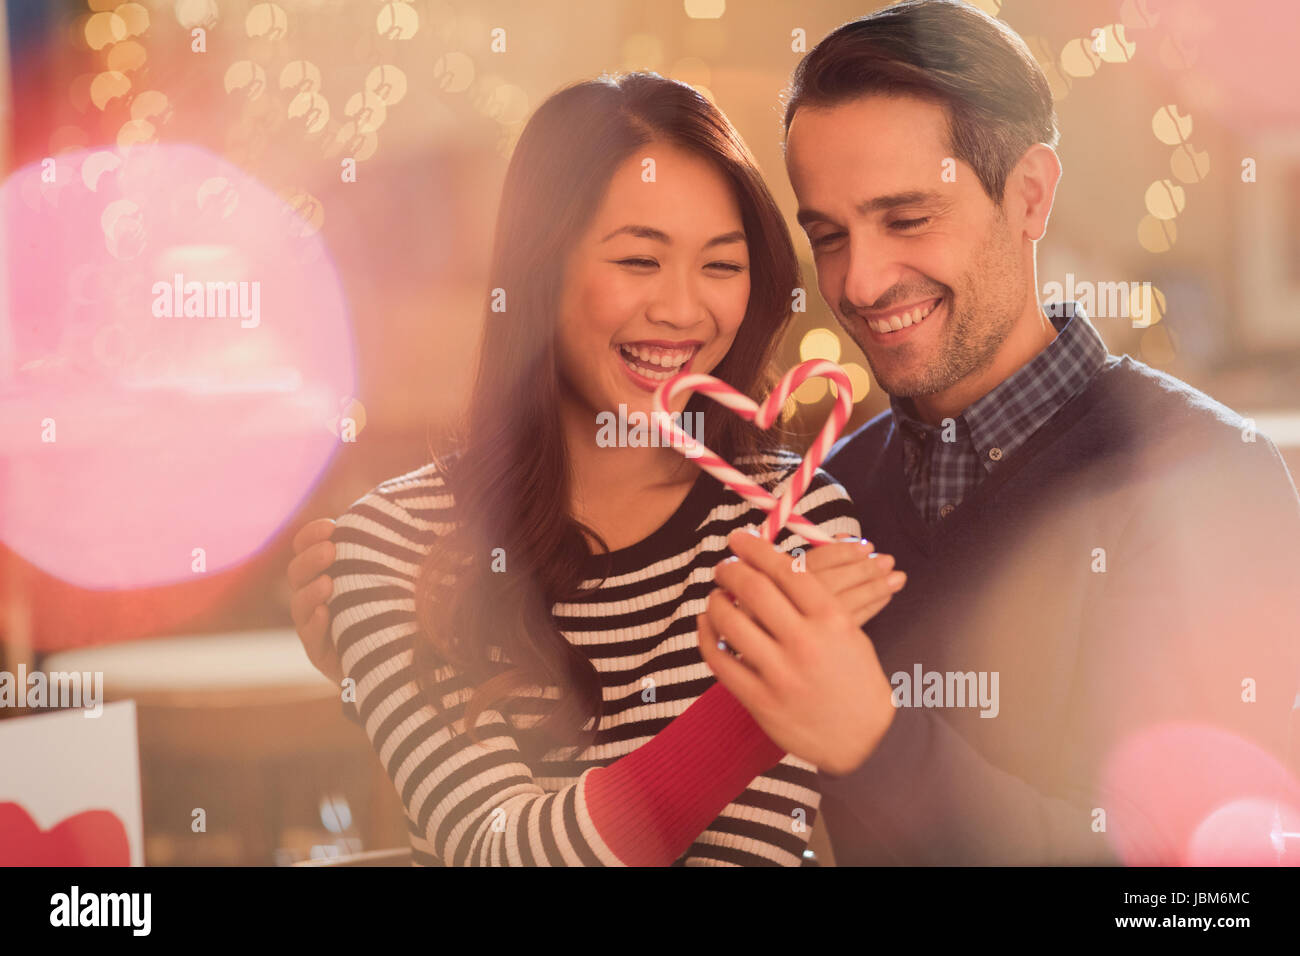 Couple holding heart-shape candy canes Stock Photo